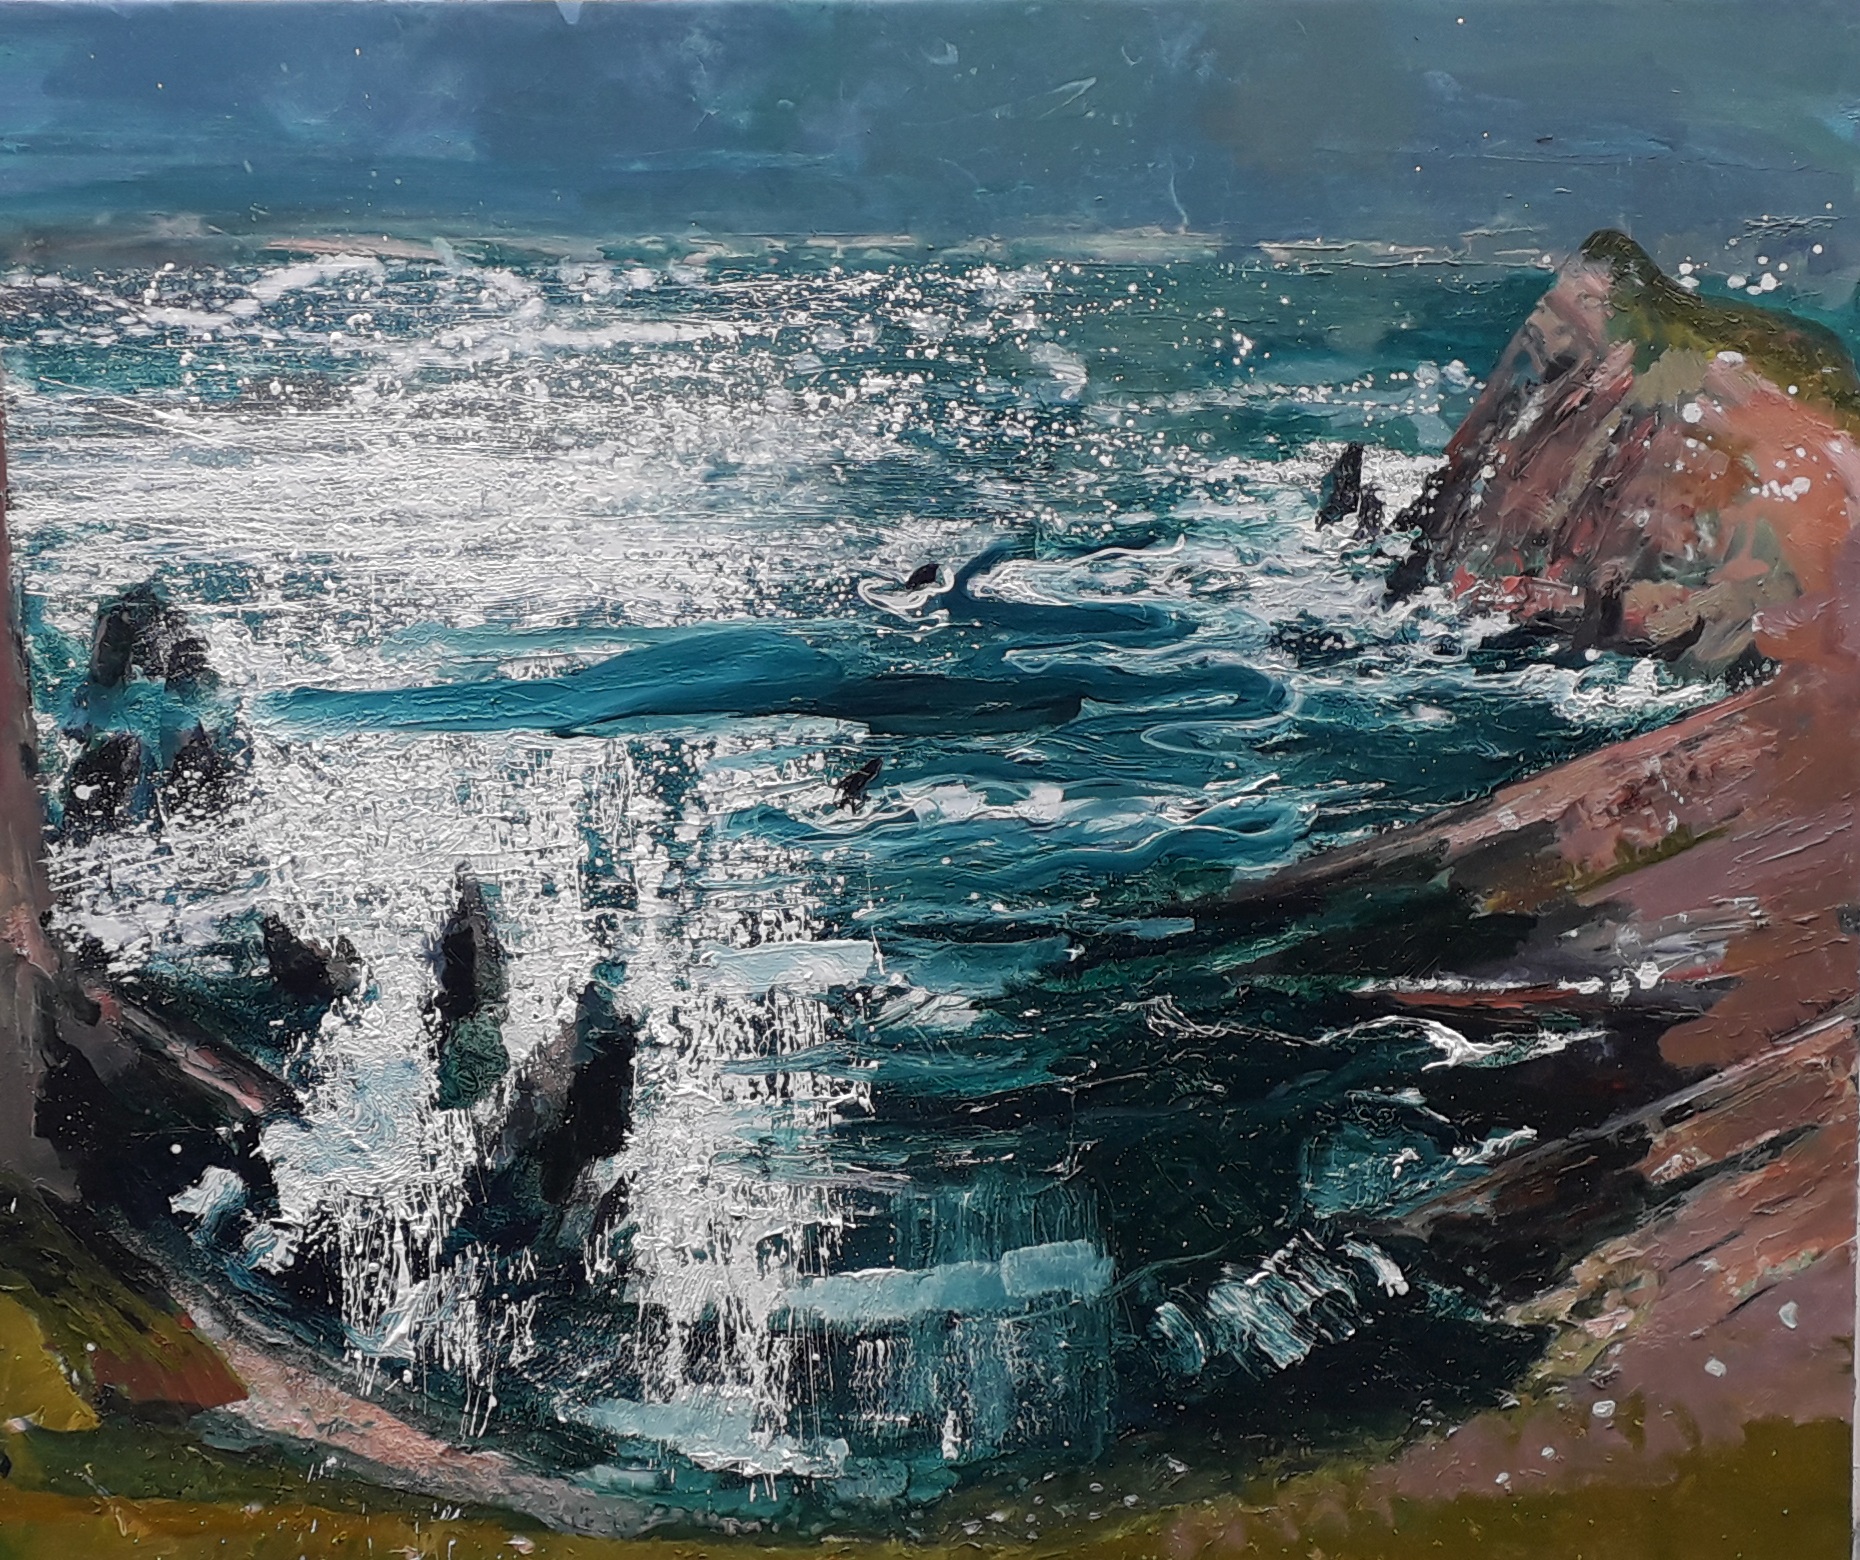 'Donegal Coast', oil on canvas, 120cm x 100cm, £3500